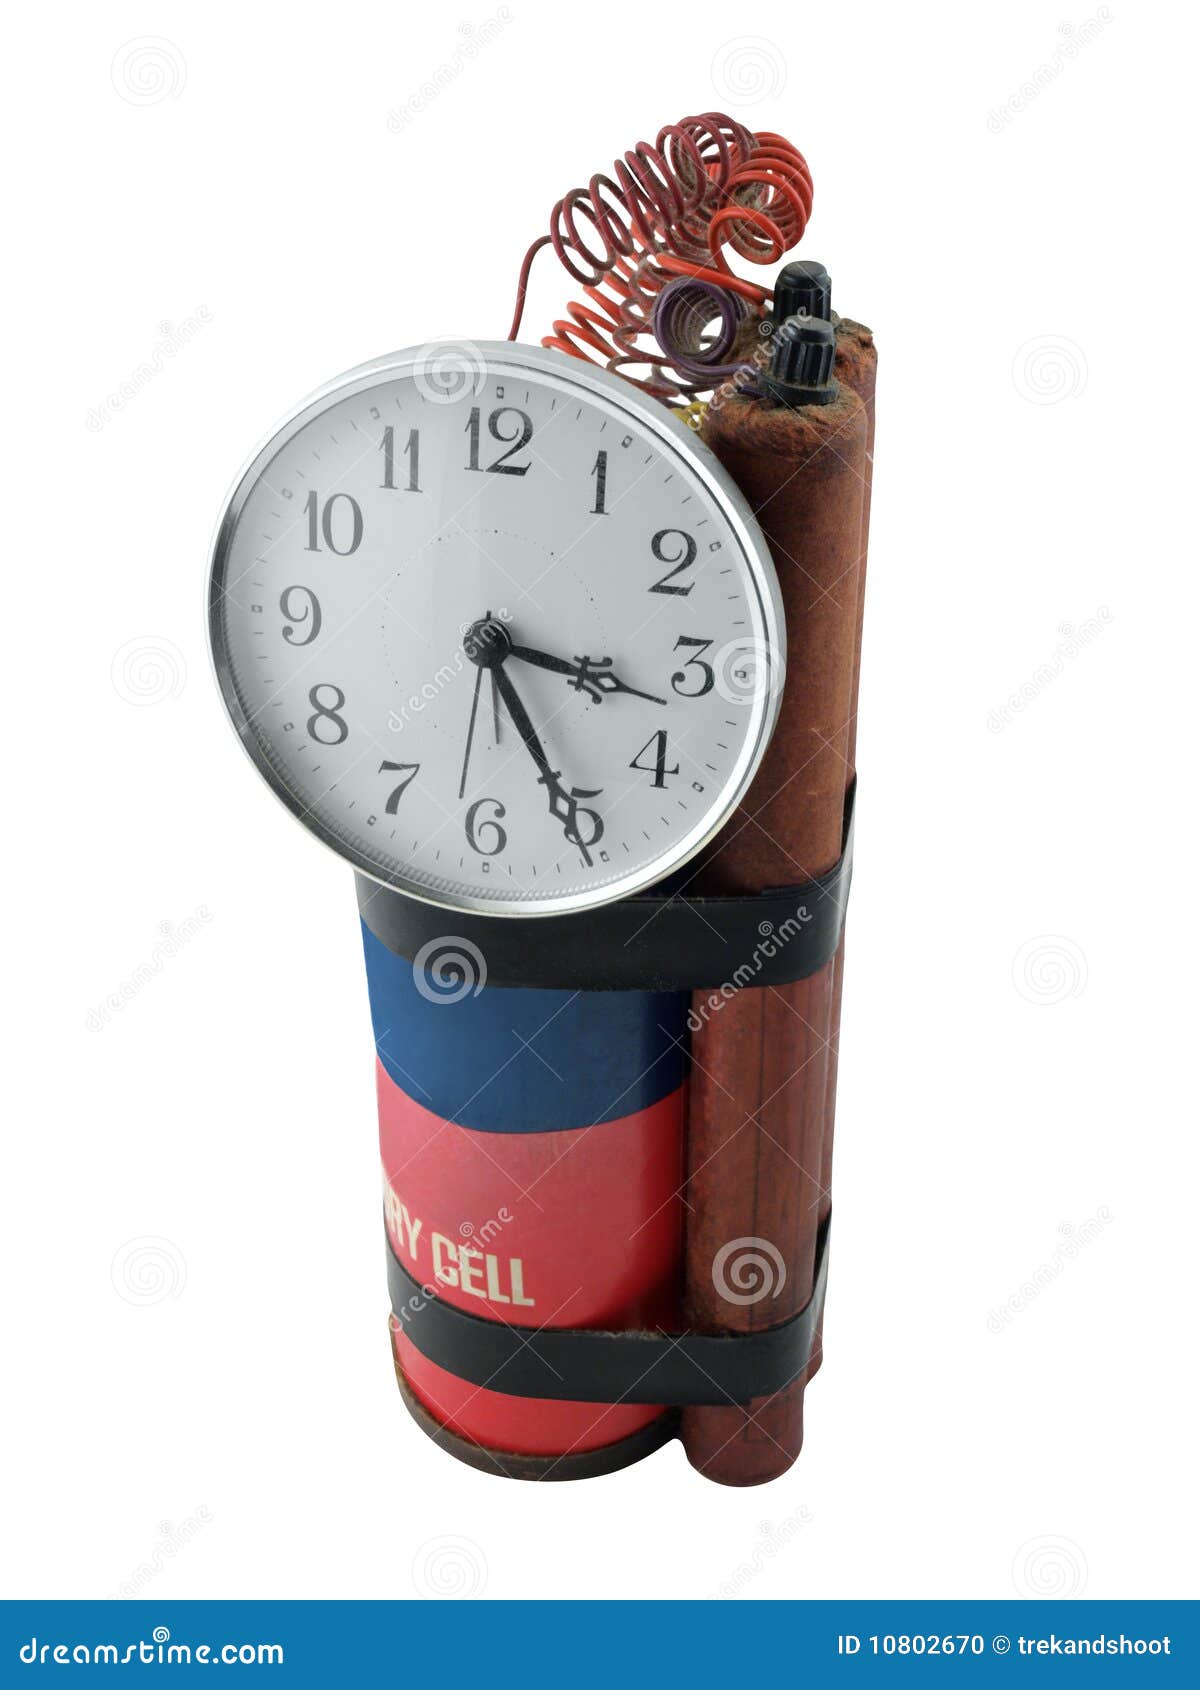 Time bomb Stock Photos, Royalty Free Time bomb Images